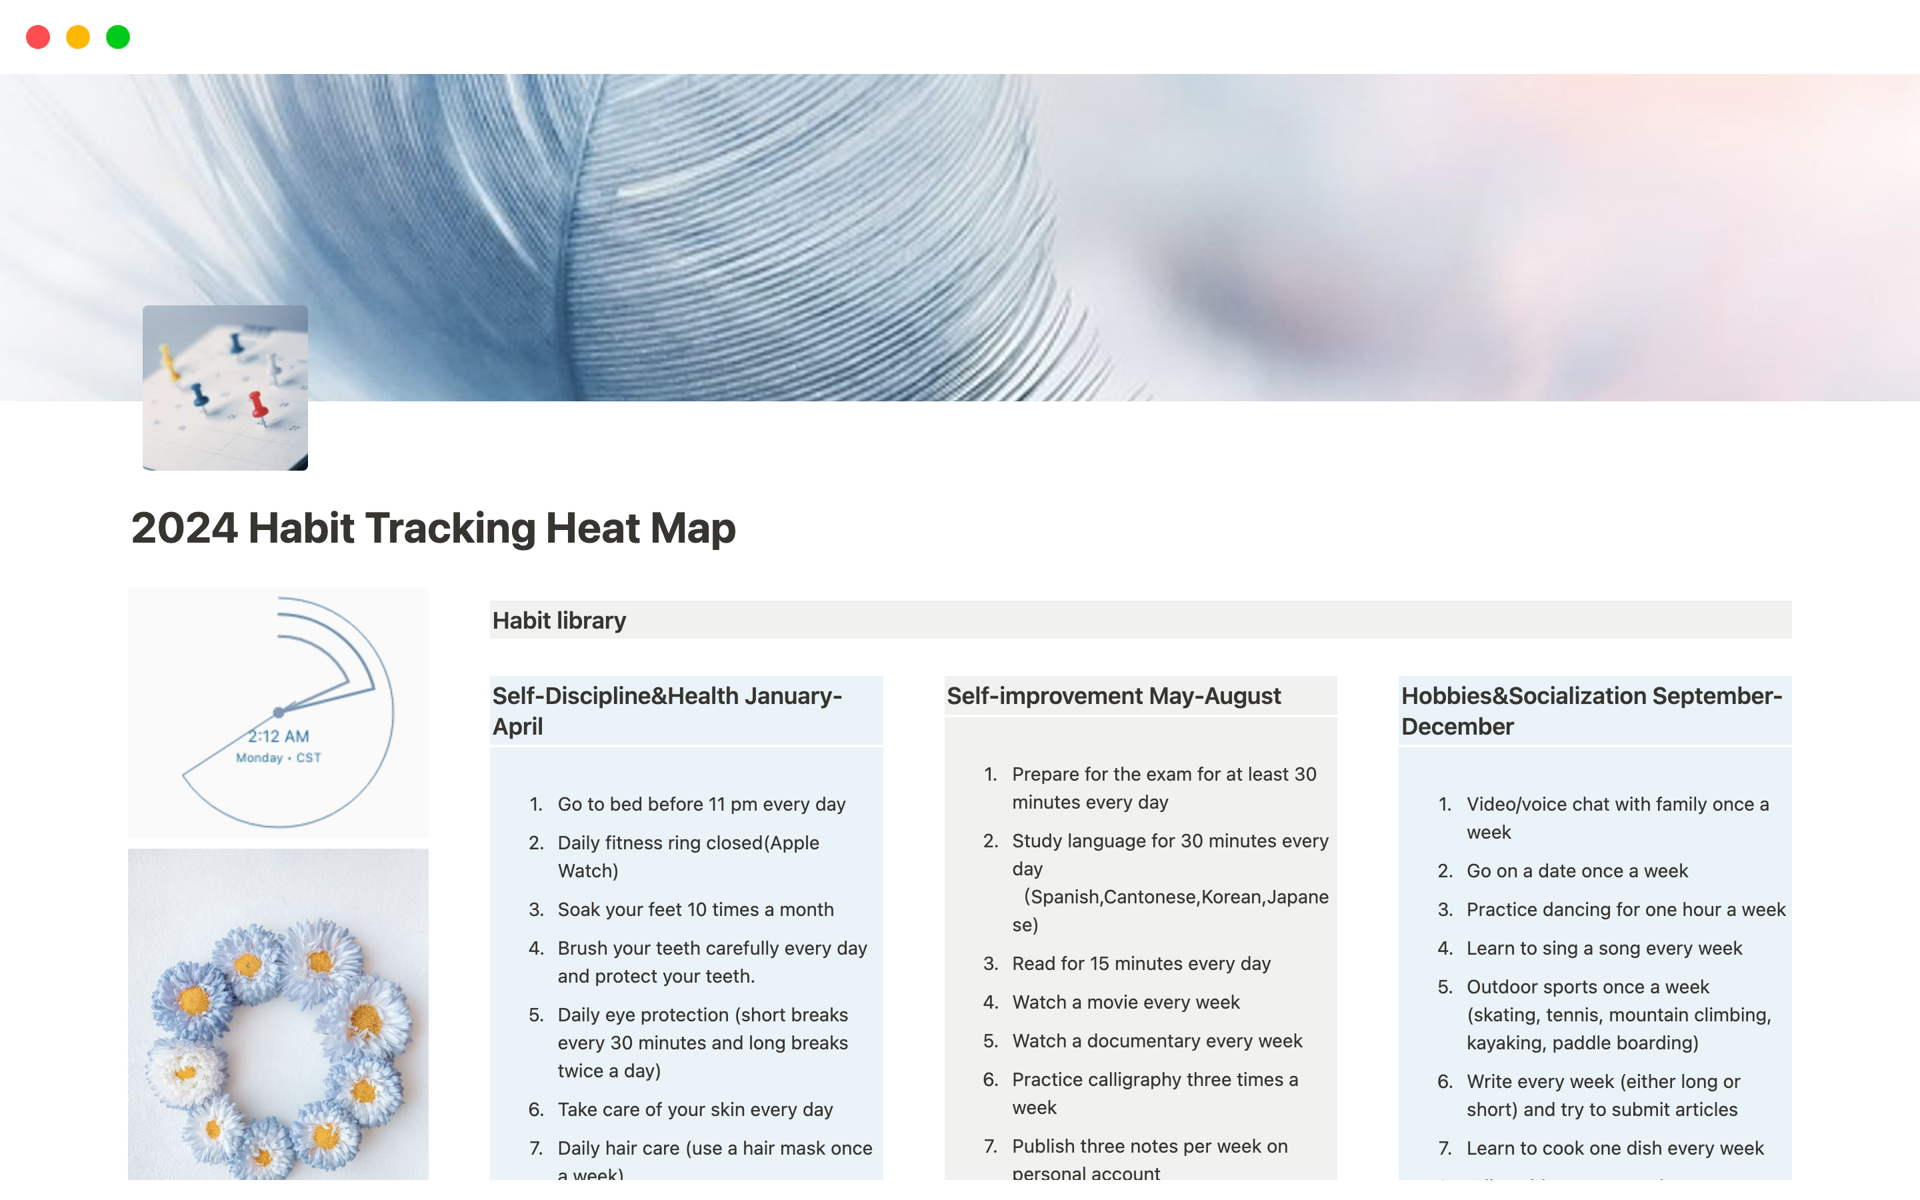 The 36 habits that need to be developed in 2024 are tracked and displayed as a heat map.